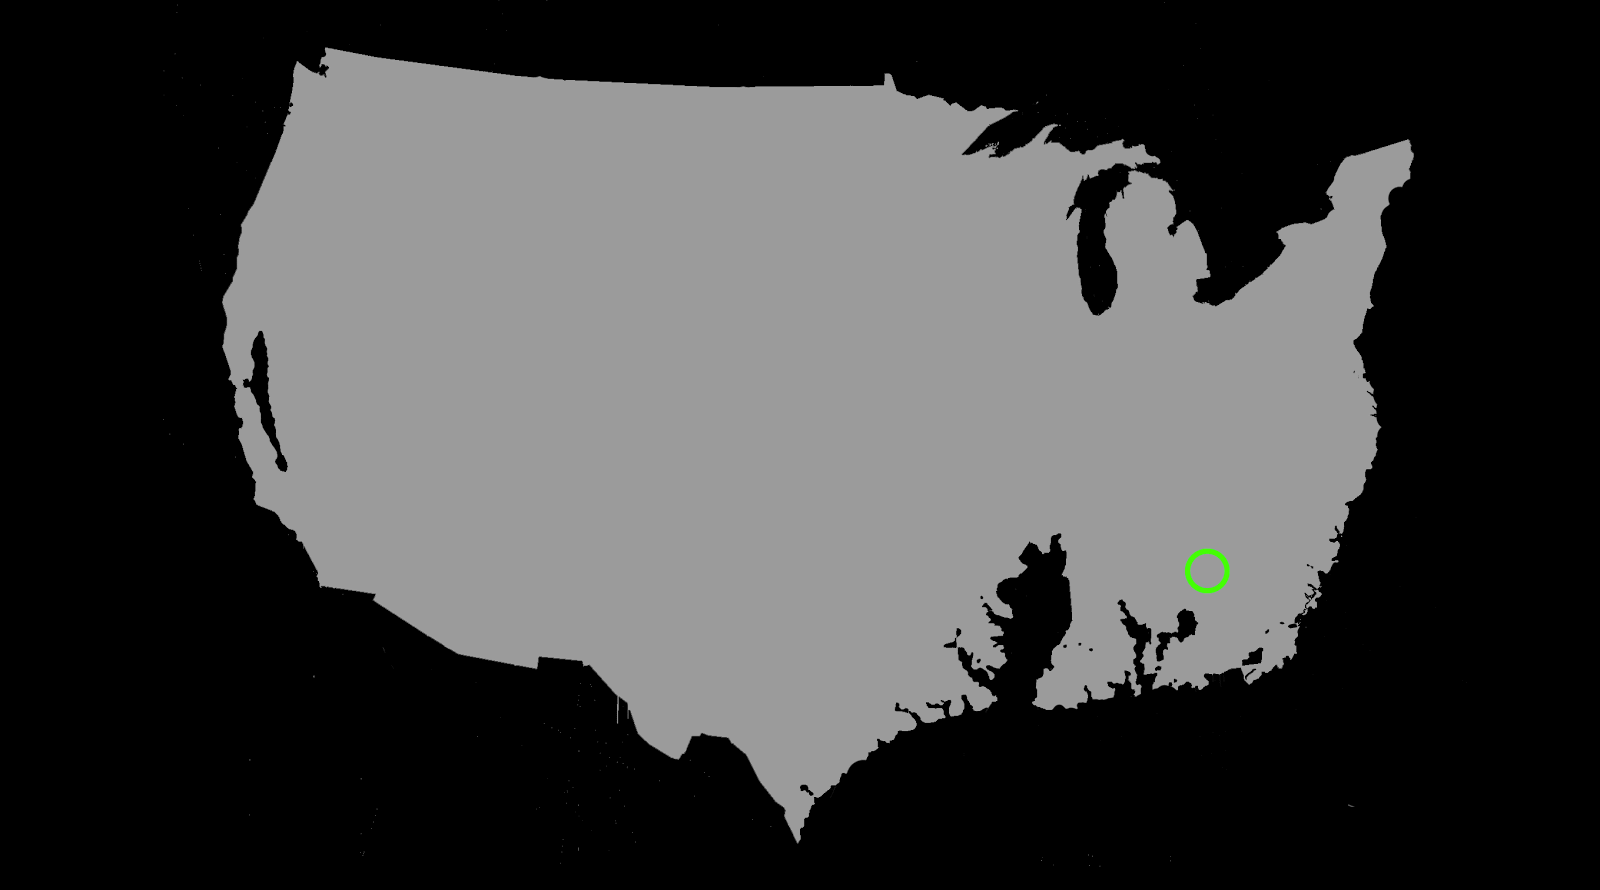 A map of the partly-submerged USA. Atlanta, Georgia is highlighted